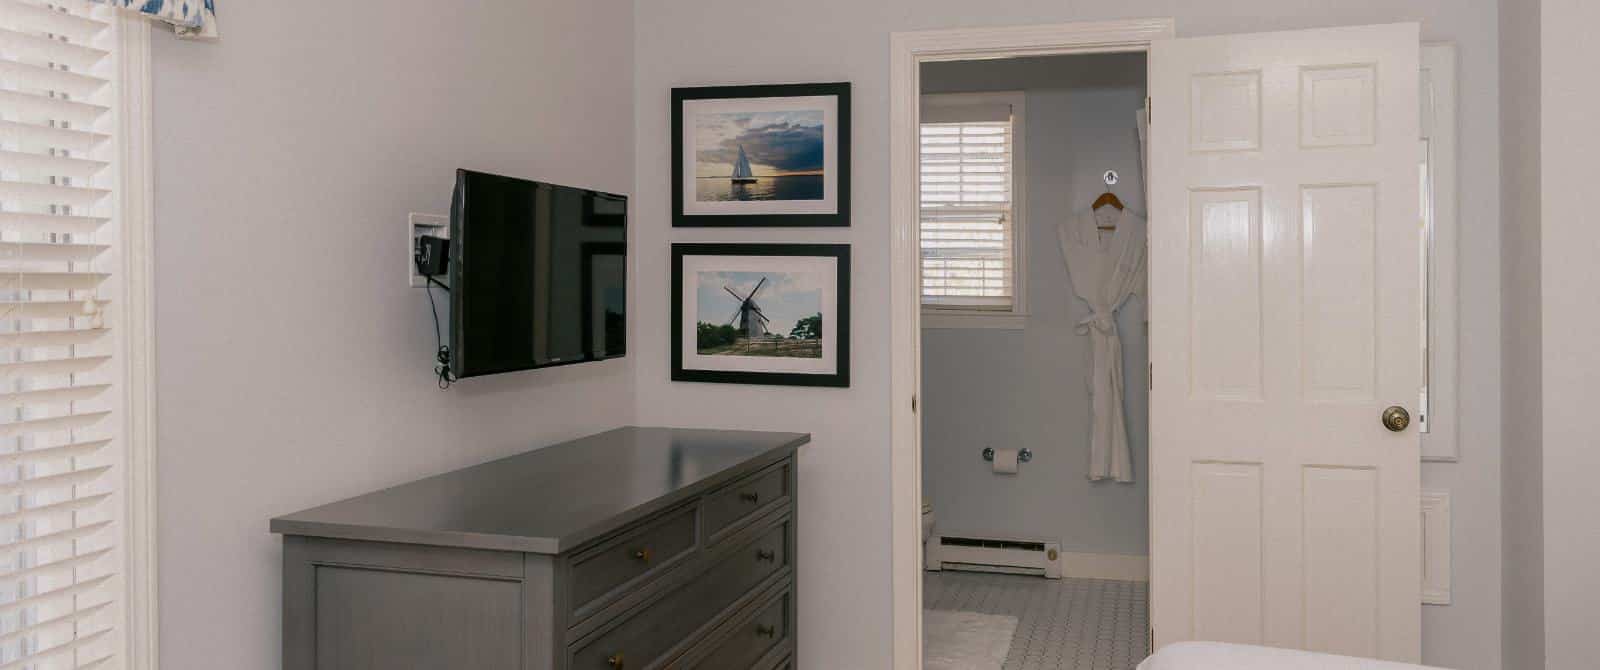 Bedroom with light colored walls, gray dresser, wall-mounted flat-screen TV, and view into bathroom